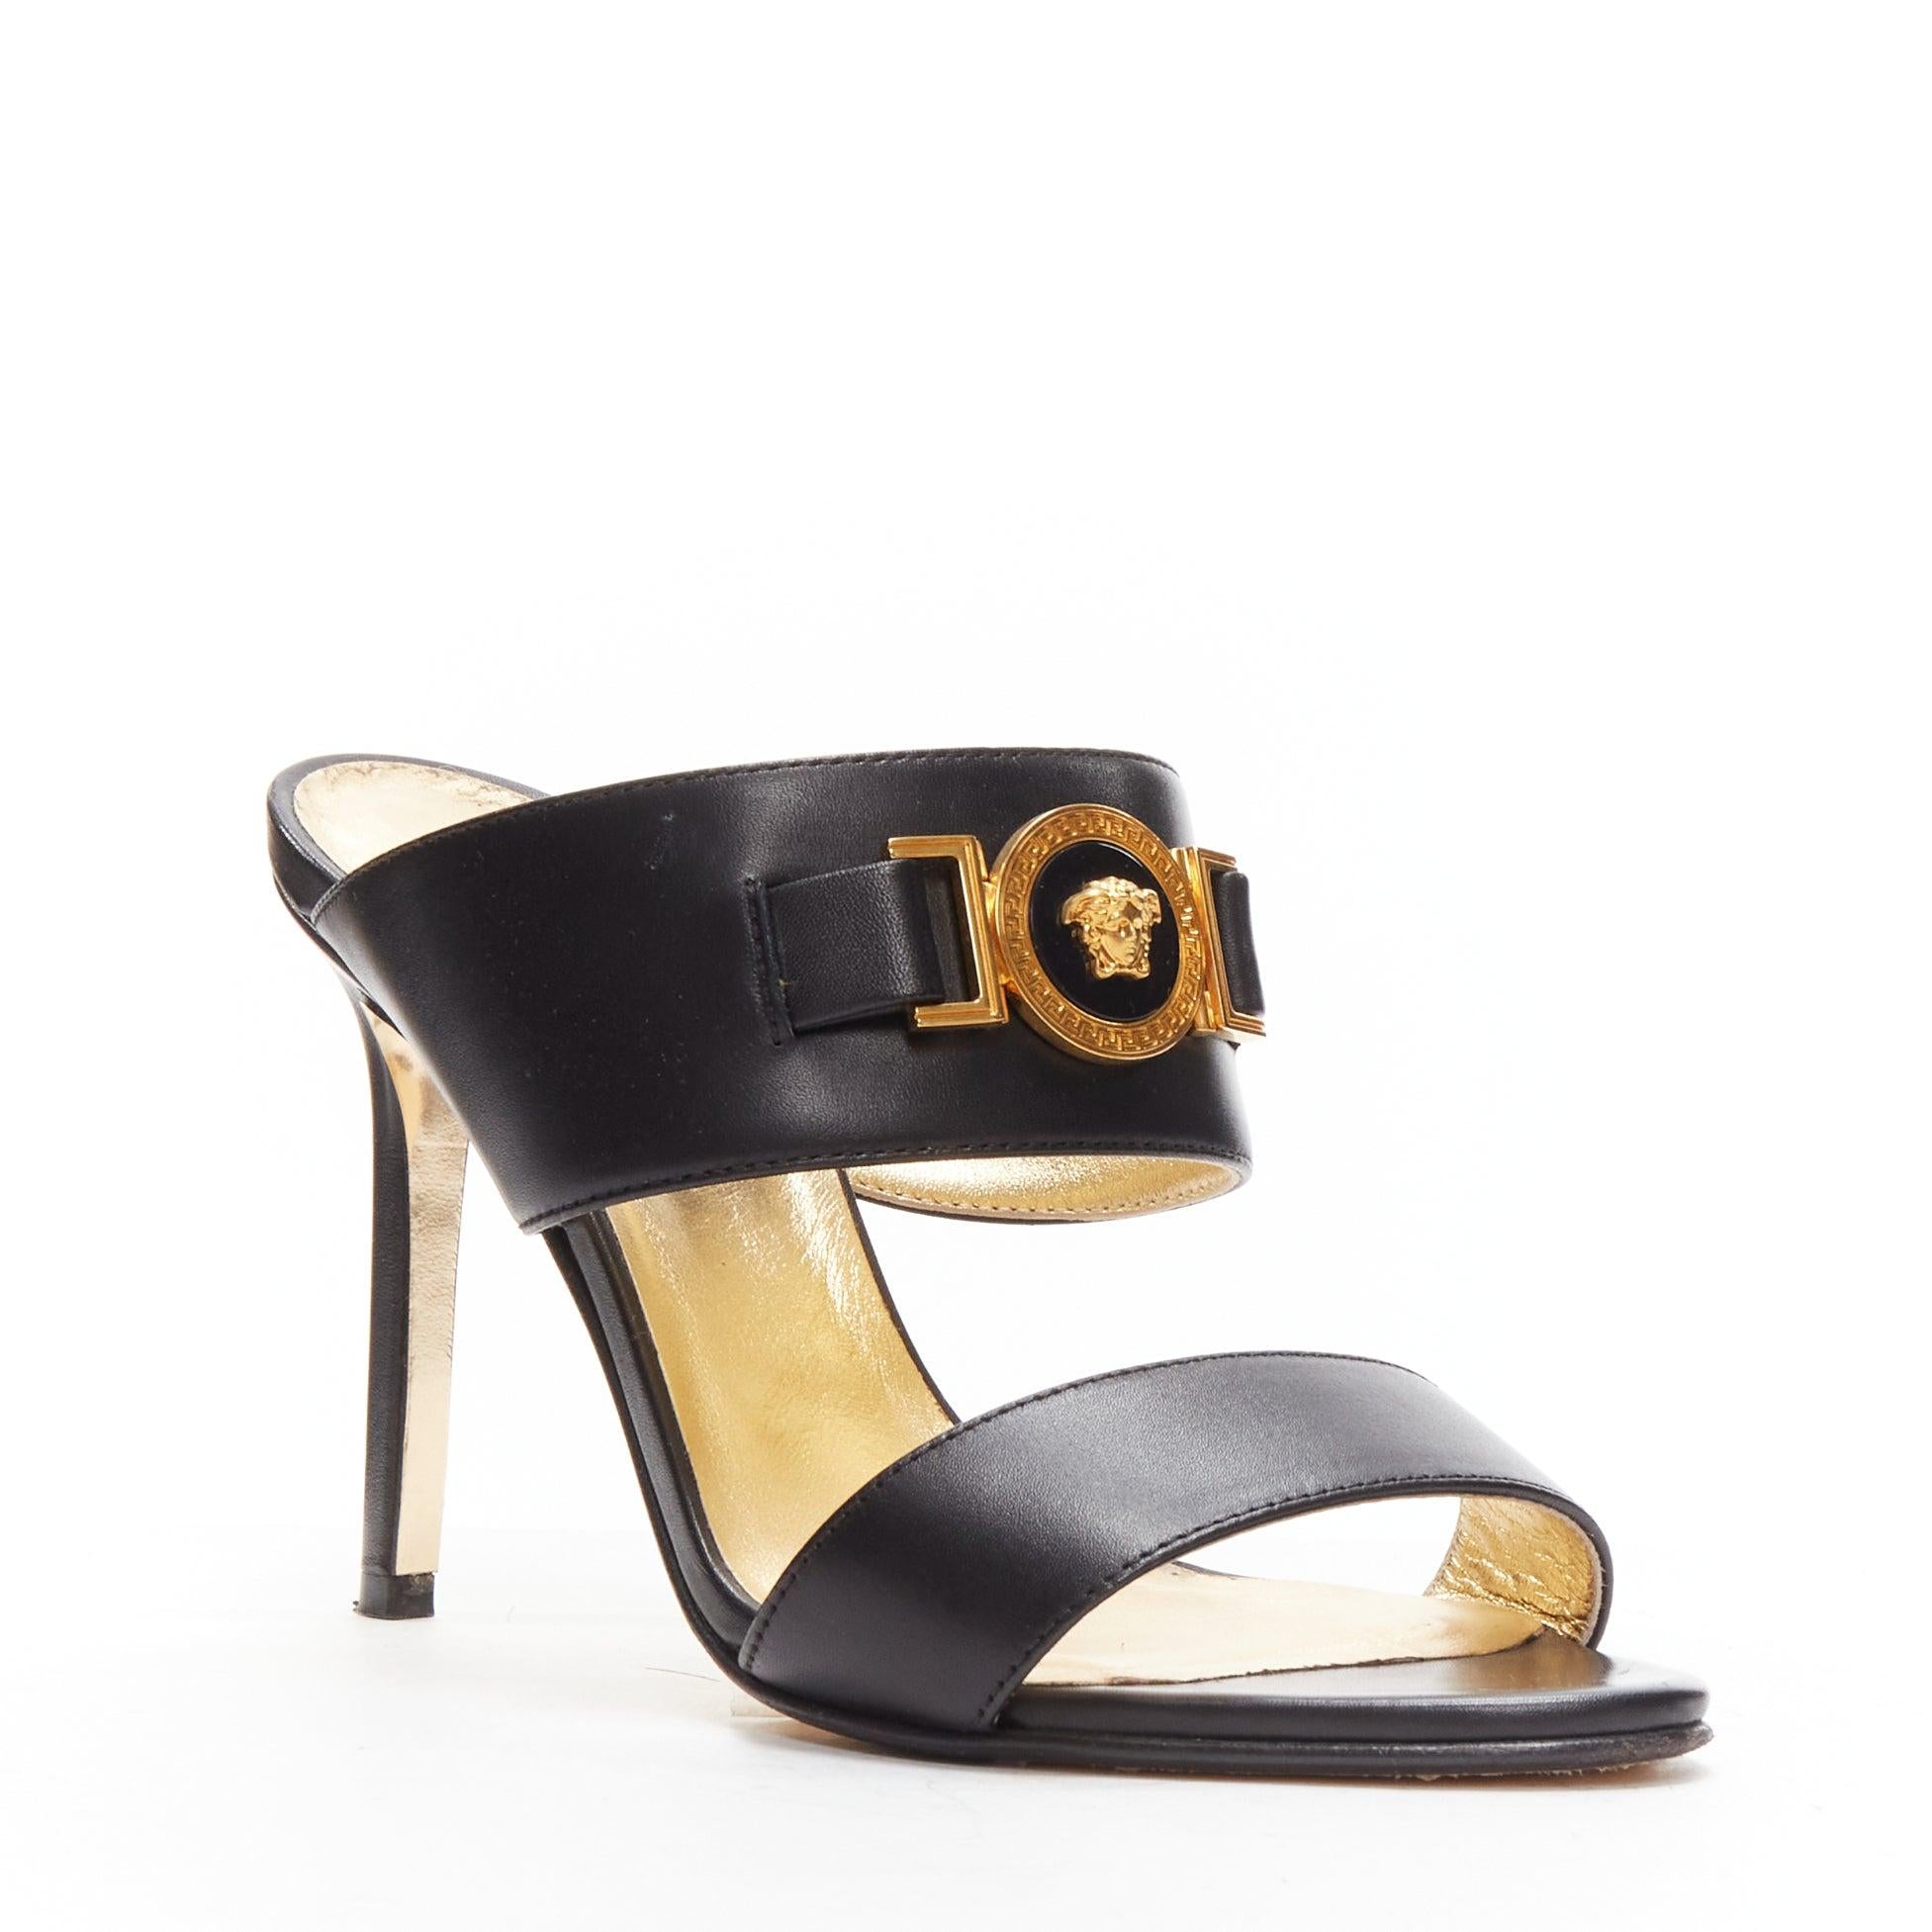 VERSACE Tribute gold Medusa buckle black double strap high heel mule sandals EU37
Reference: LNKO/A02169
Brand: Versace
Designer: Donatella Versace
Collection: Tribute
Material: Leather, Metal
Color: Black, Gold
Pattern: Solid
Closure: Slip